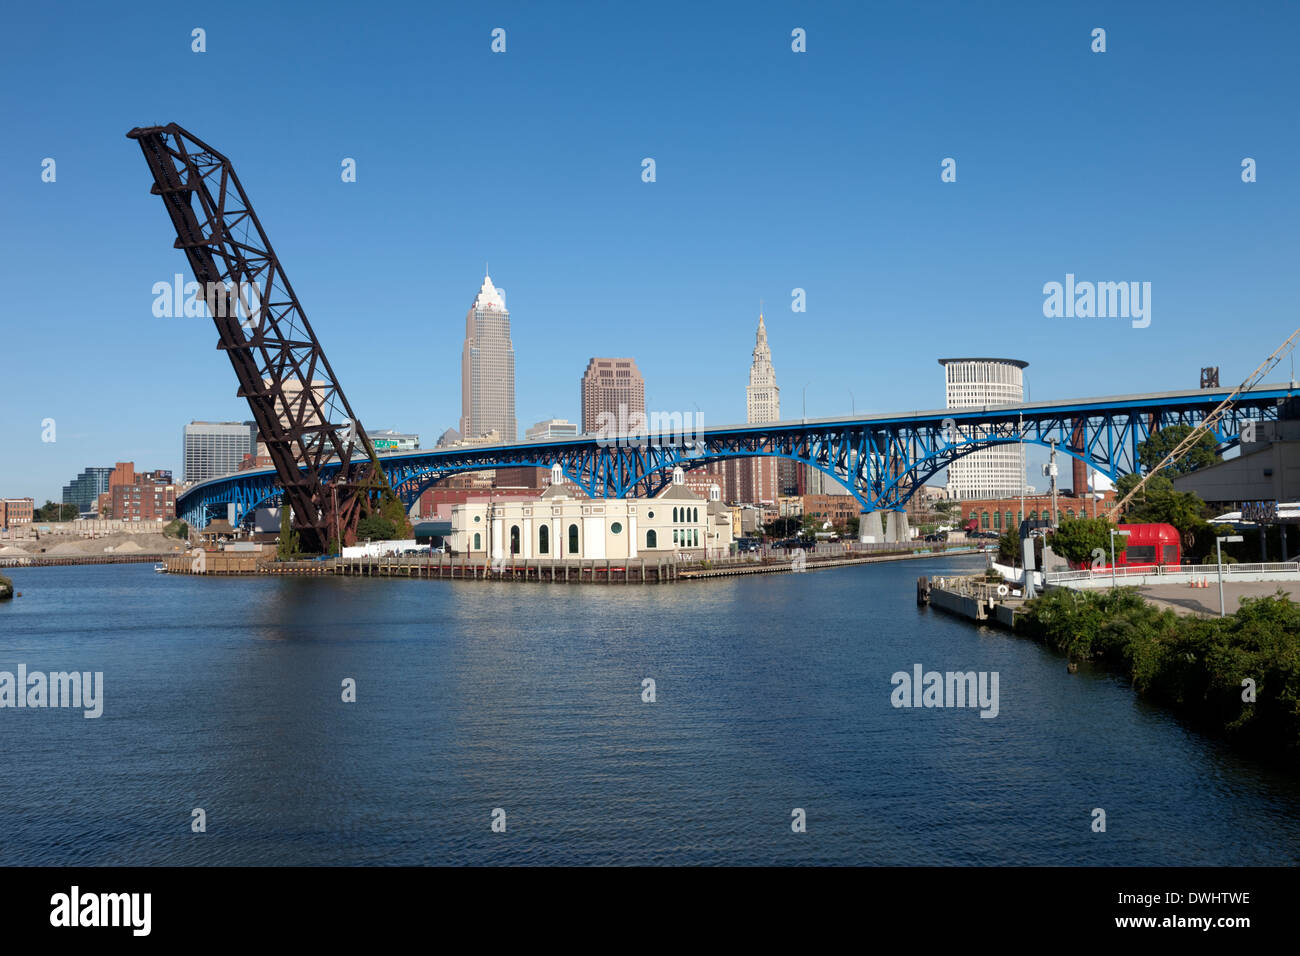 View of Cleveland, Ohio Main Avenue Bridge and the 'Flats' entertainment district and Cuyahoga River near Lake Erie. Stock Photo